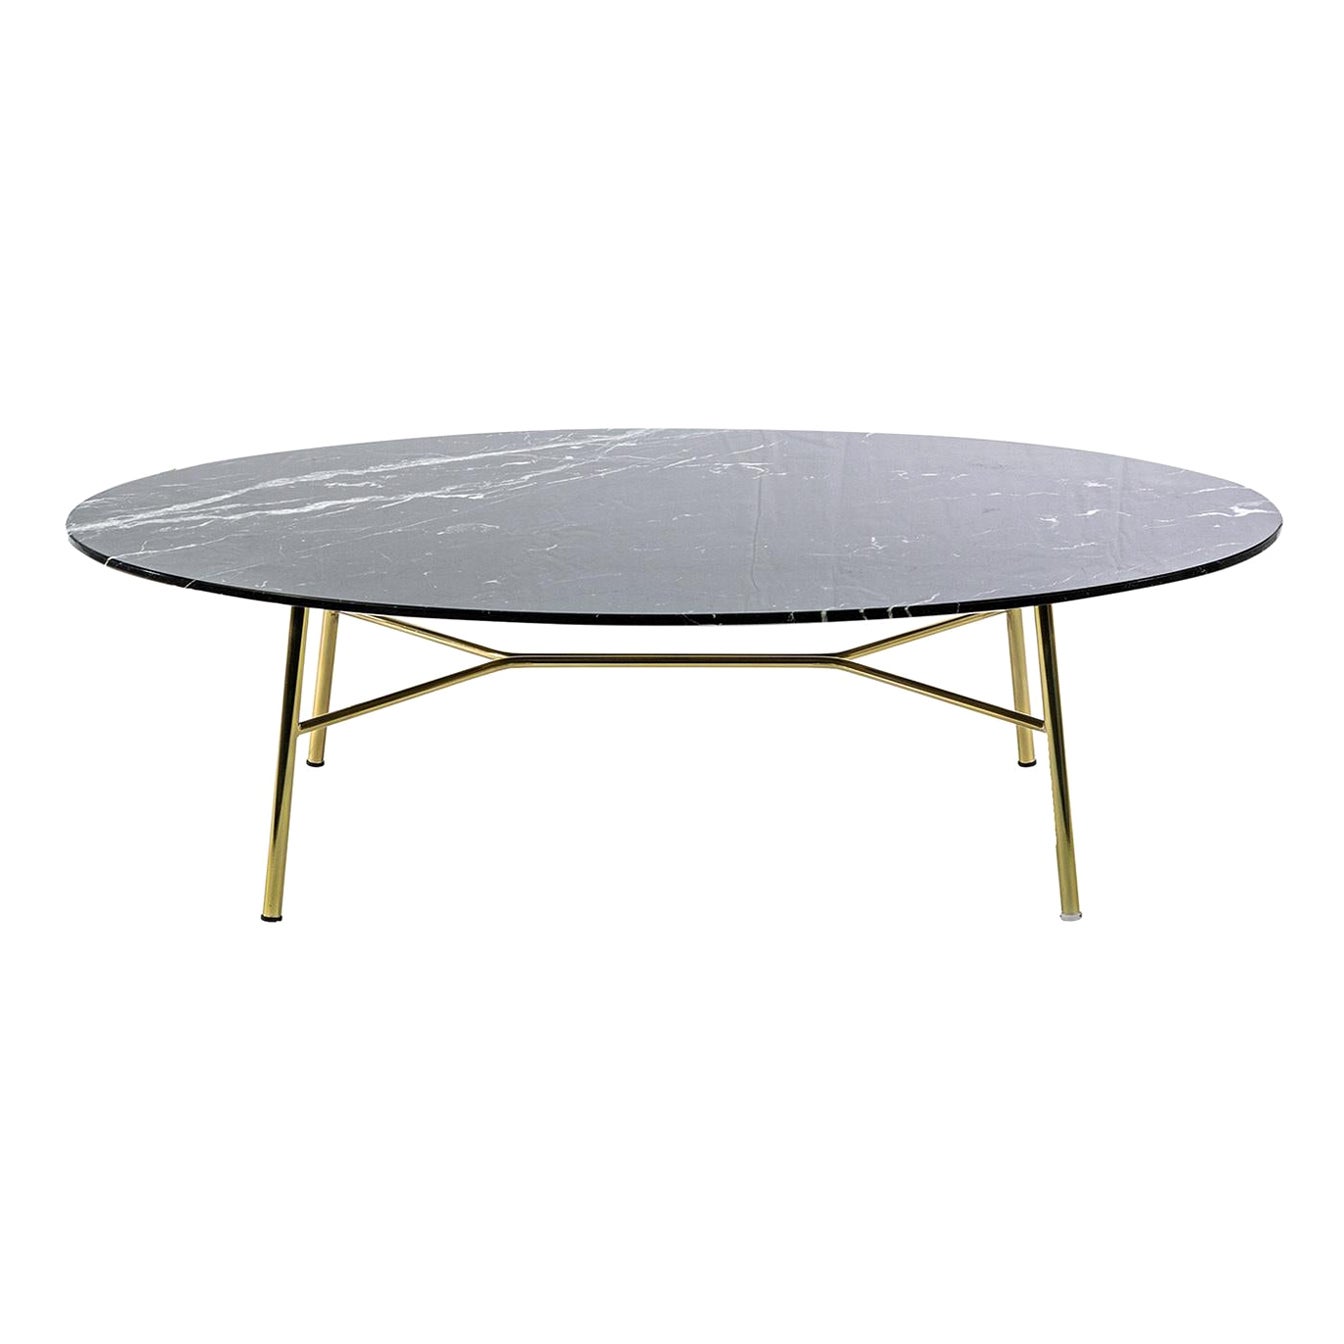 Yuki Oval Coffee Table with Black Marquinia Top #2 by EP Studio For Sale